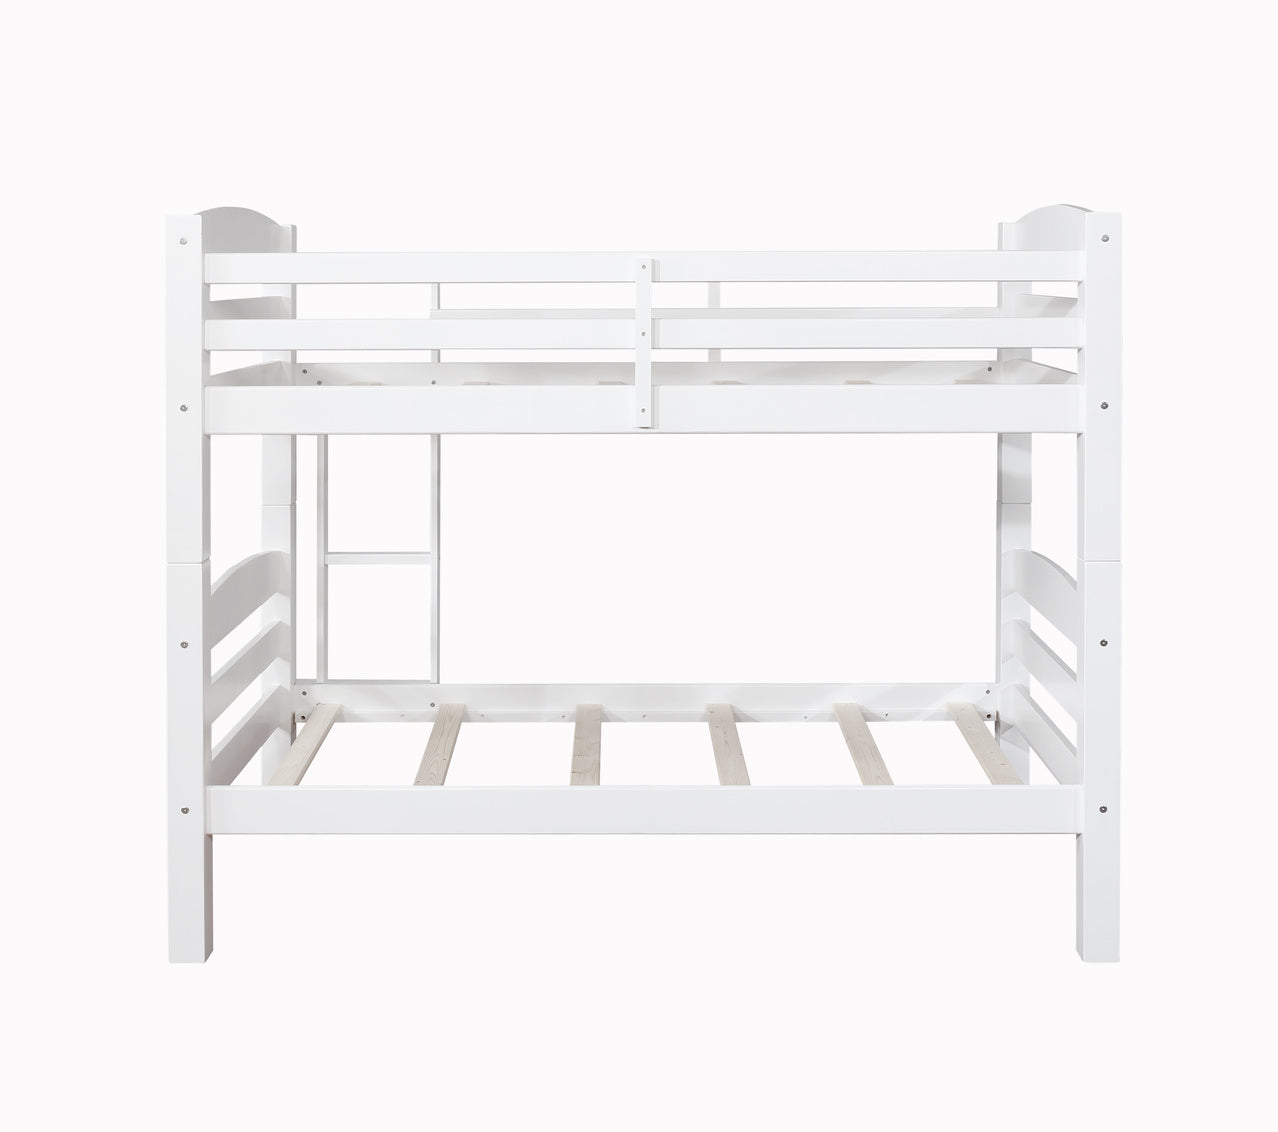 WEEKLY or MONTHLY. Porterhouse Twin over Twin Bunk in White